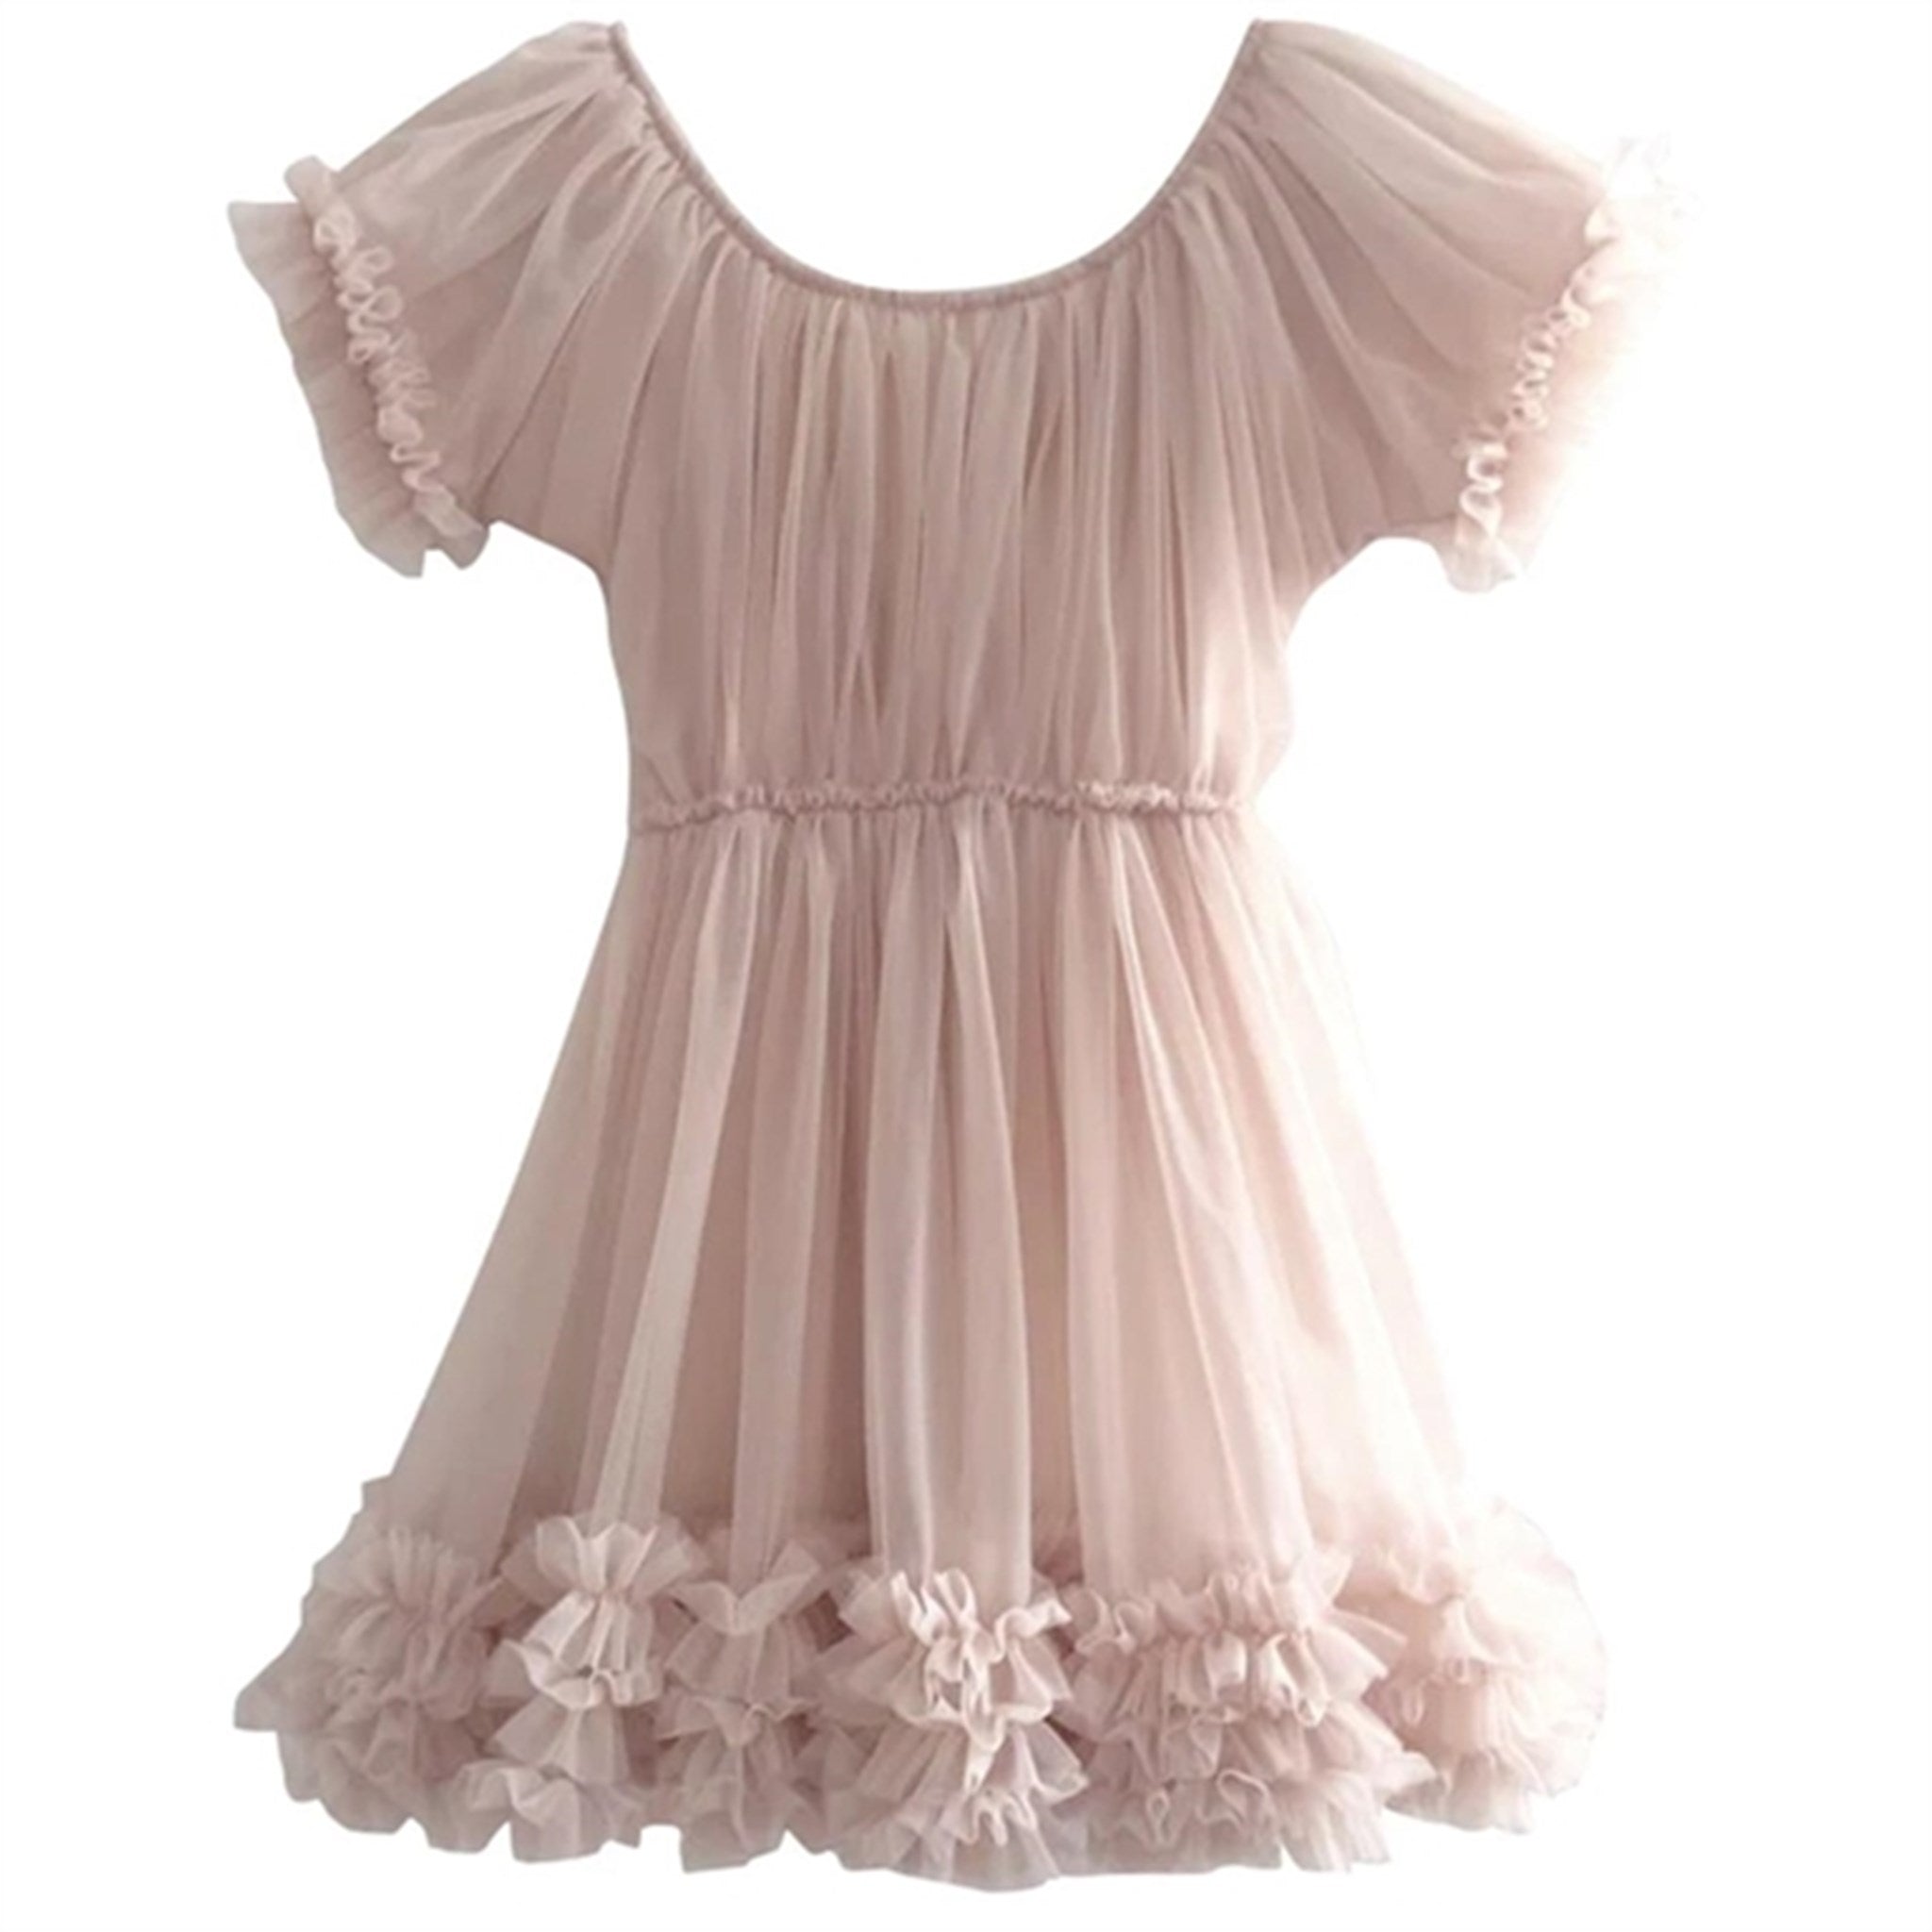 Dolly by Le Petit Frilly Dress Ballet Pink